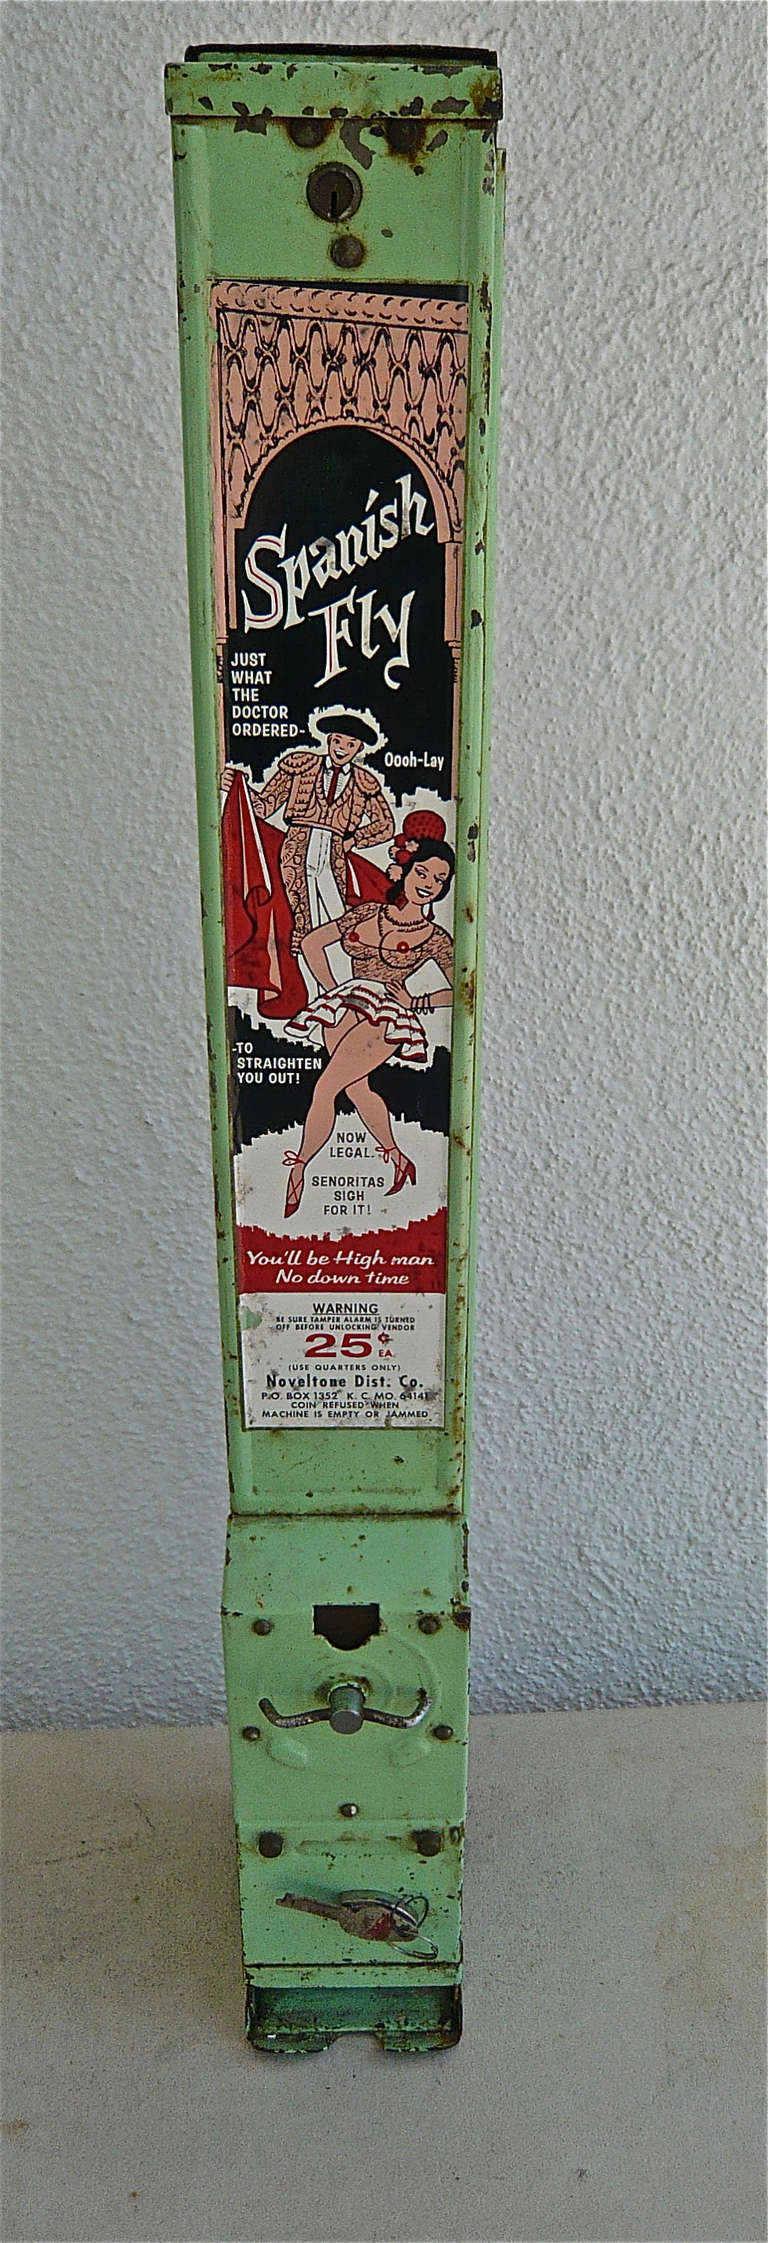 Found in roadside mens bathrooms in the 50's along with comb and condom dispensers.Early form of Viagra.